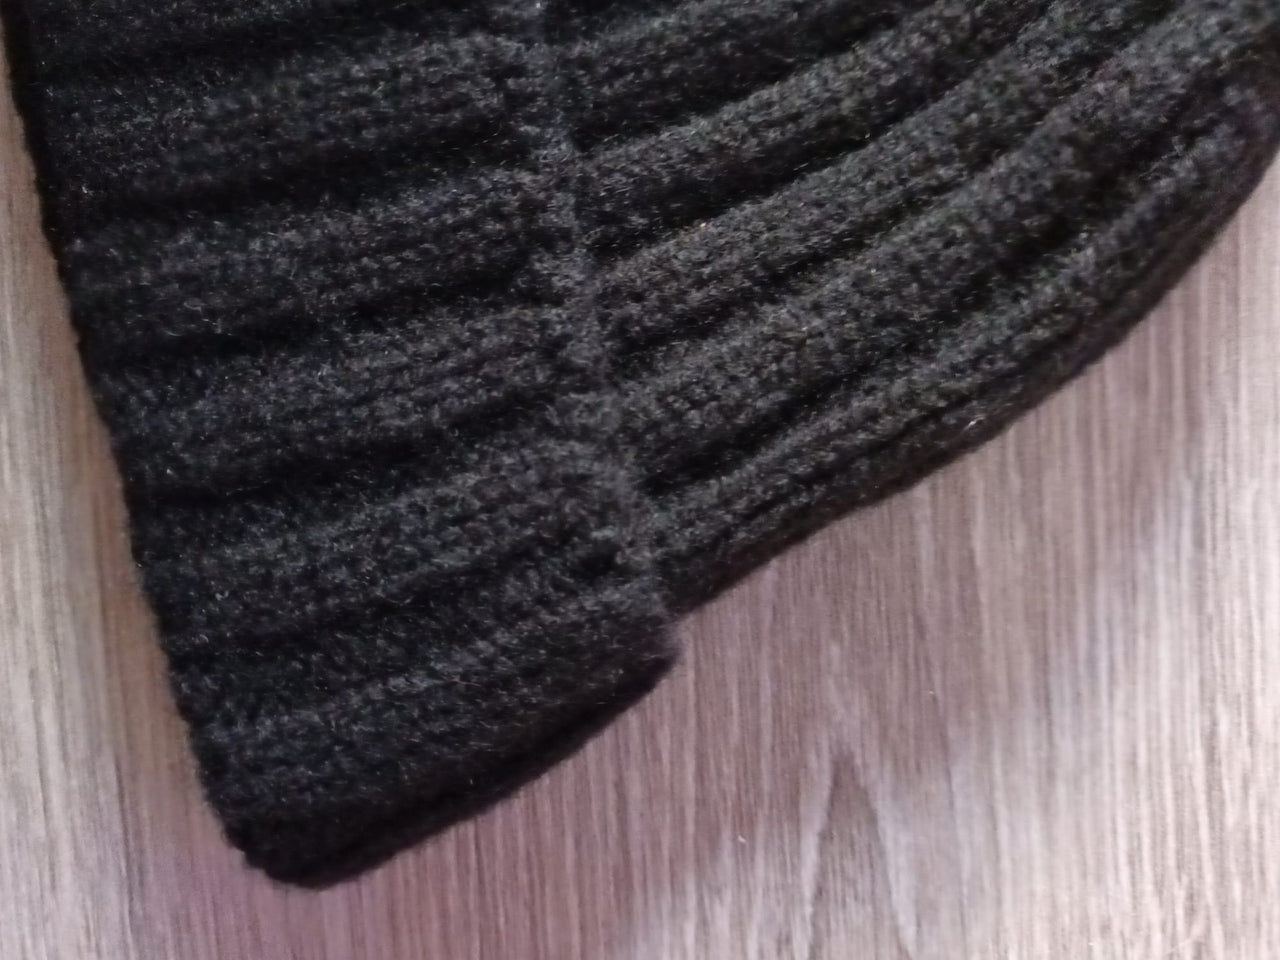 100% Cashmere Beanies